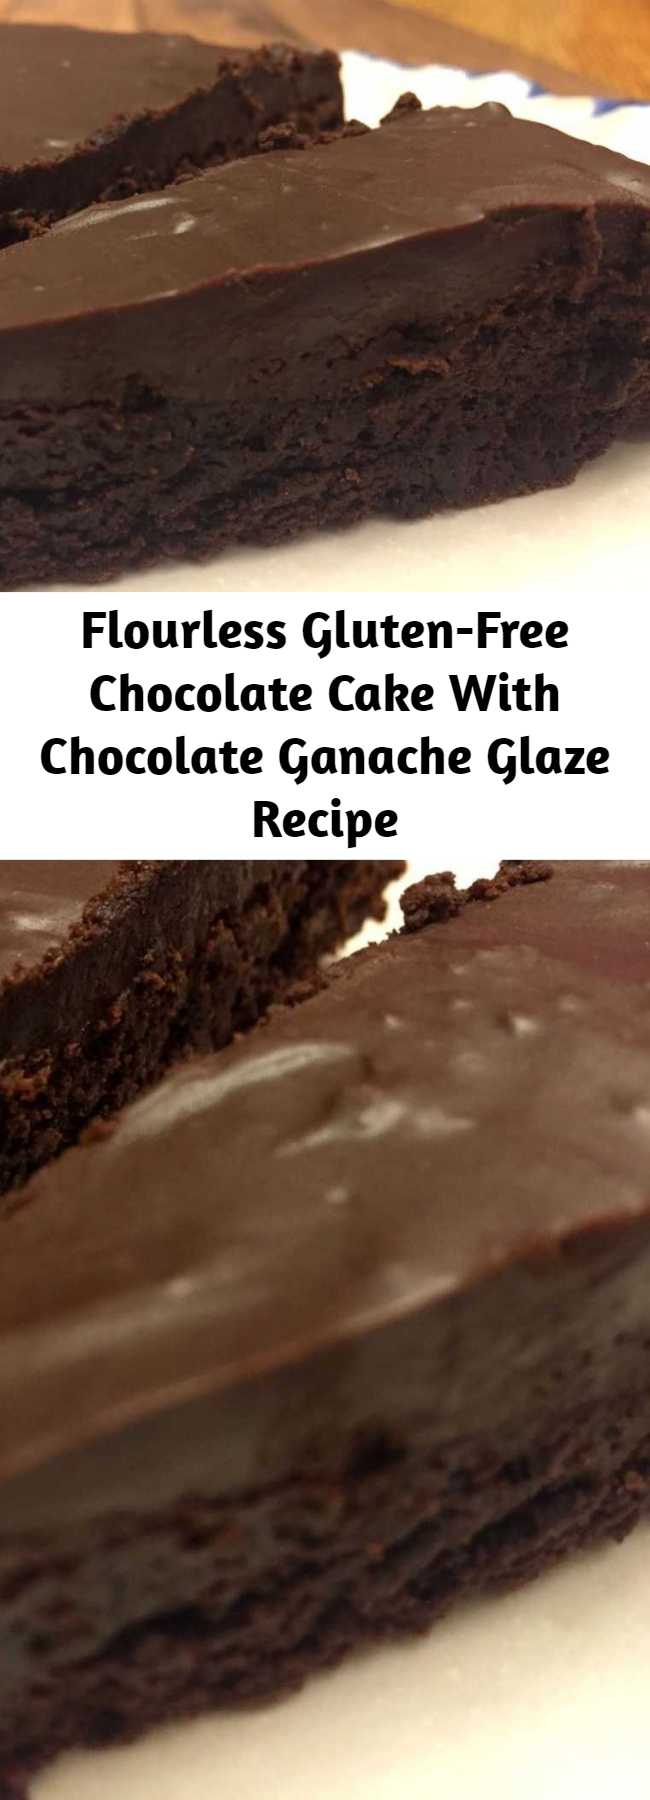 Flourless Gluten-Free Chocolate Cake With Chocolate Ganache Glaze Recipe - This amazing flourless chocolate cake is so rich, smooth and chocolatey! As an added bonus, it is also gluten-free! If you love chocolate, you are going to go crazy about this cake - this is chocoholic's heaven!